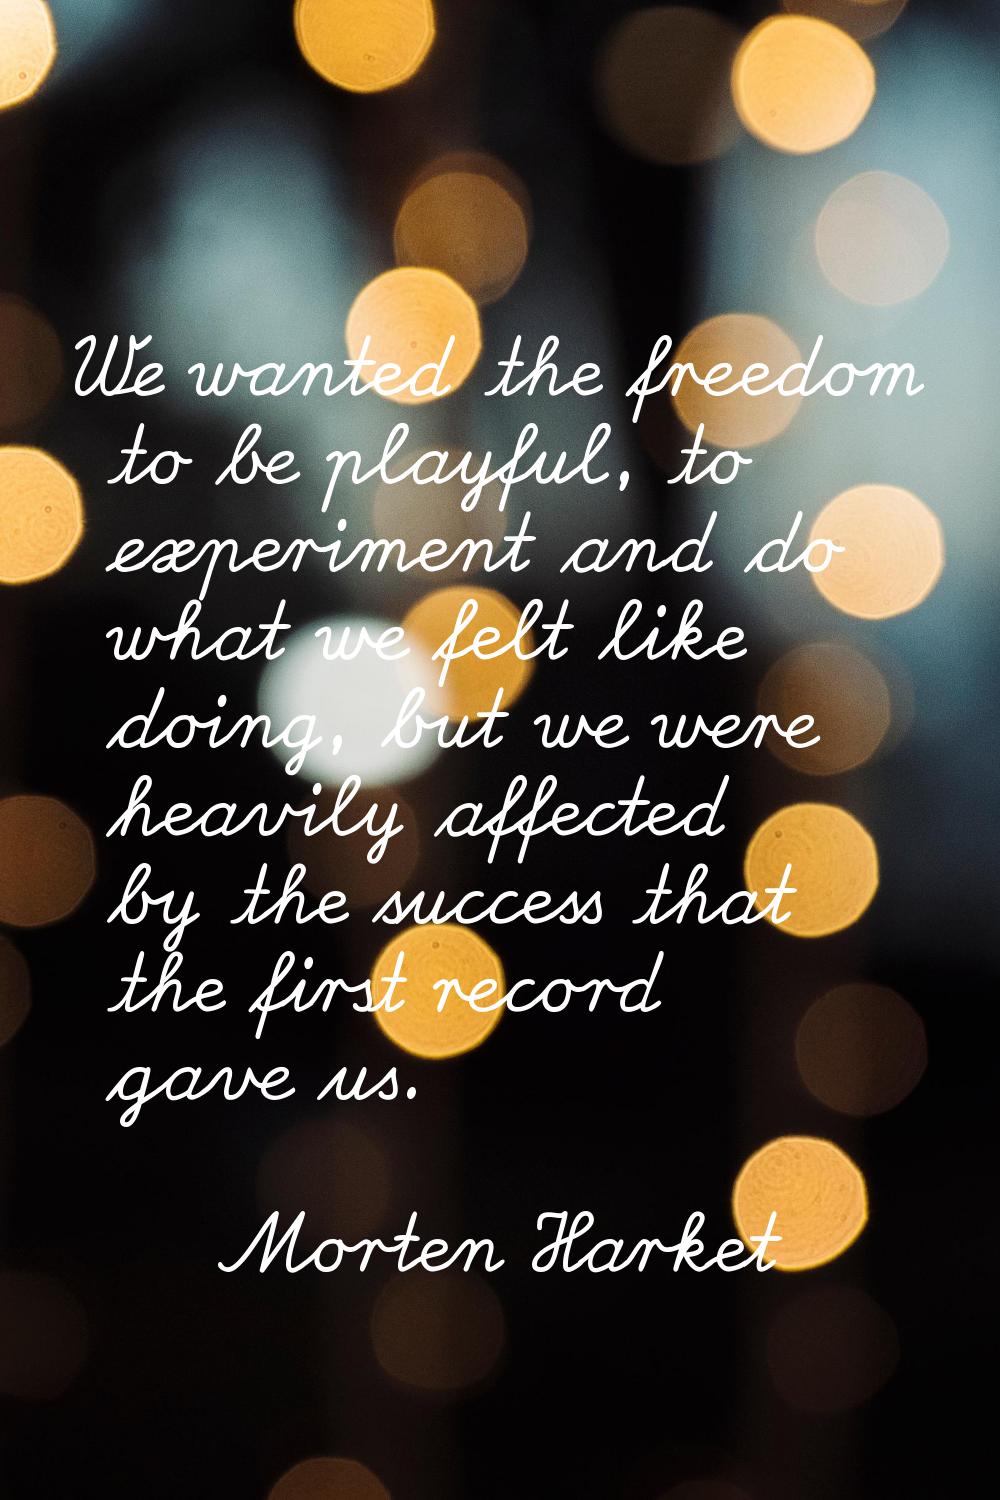 We wanted the freedom to be playful, to experiment and do what we felt like doing, but we were heav